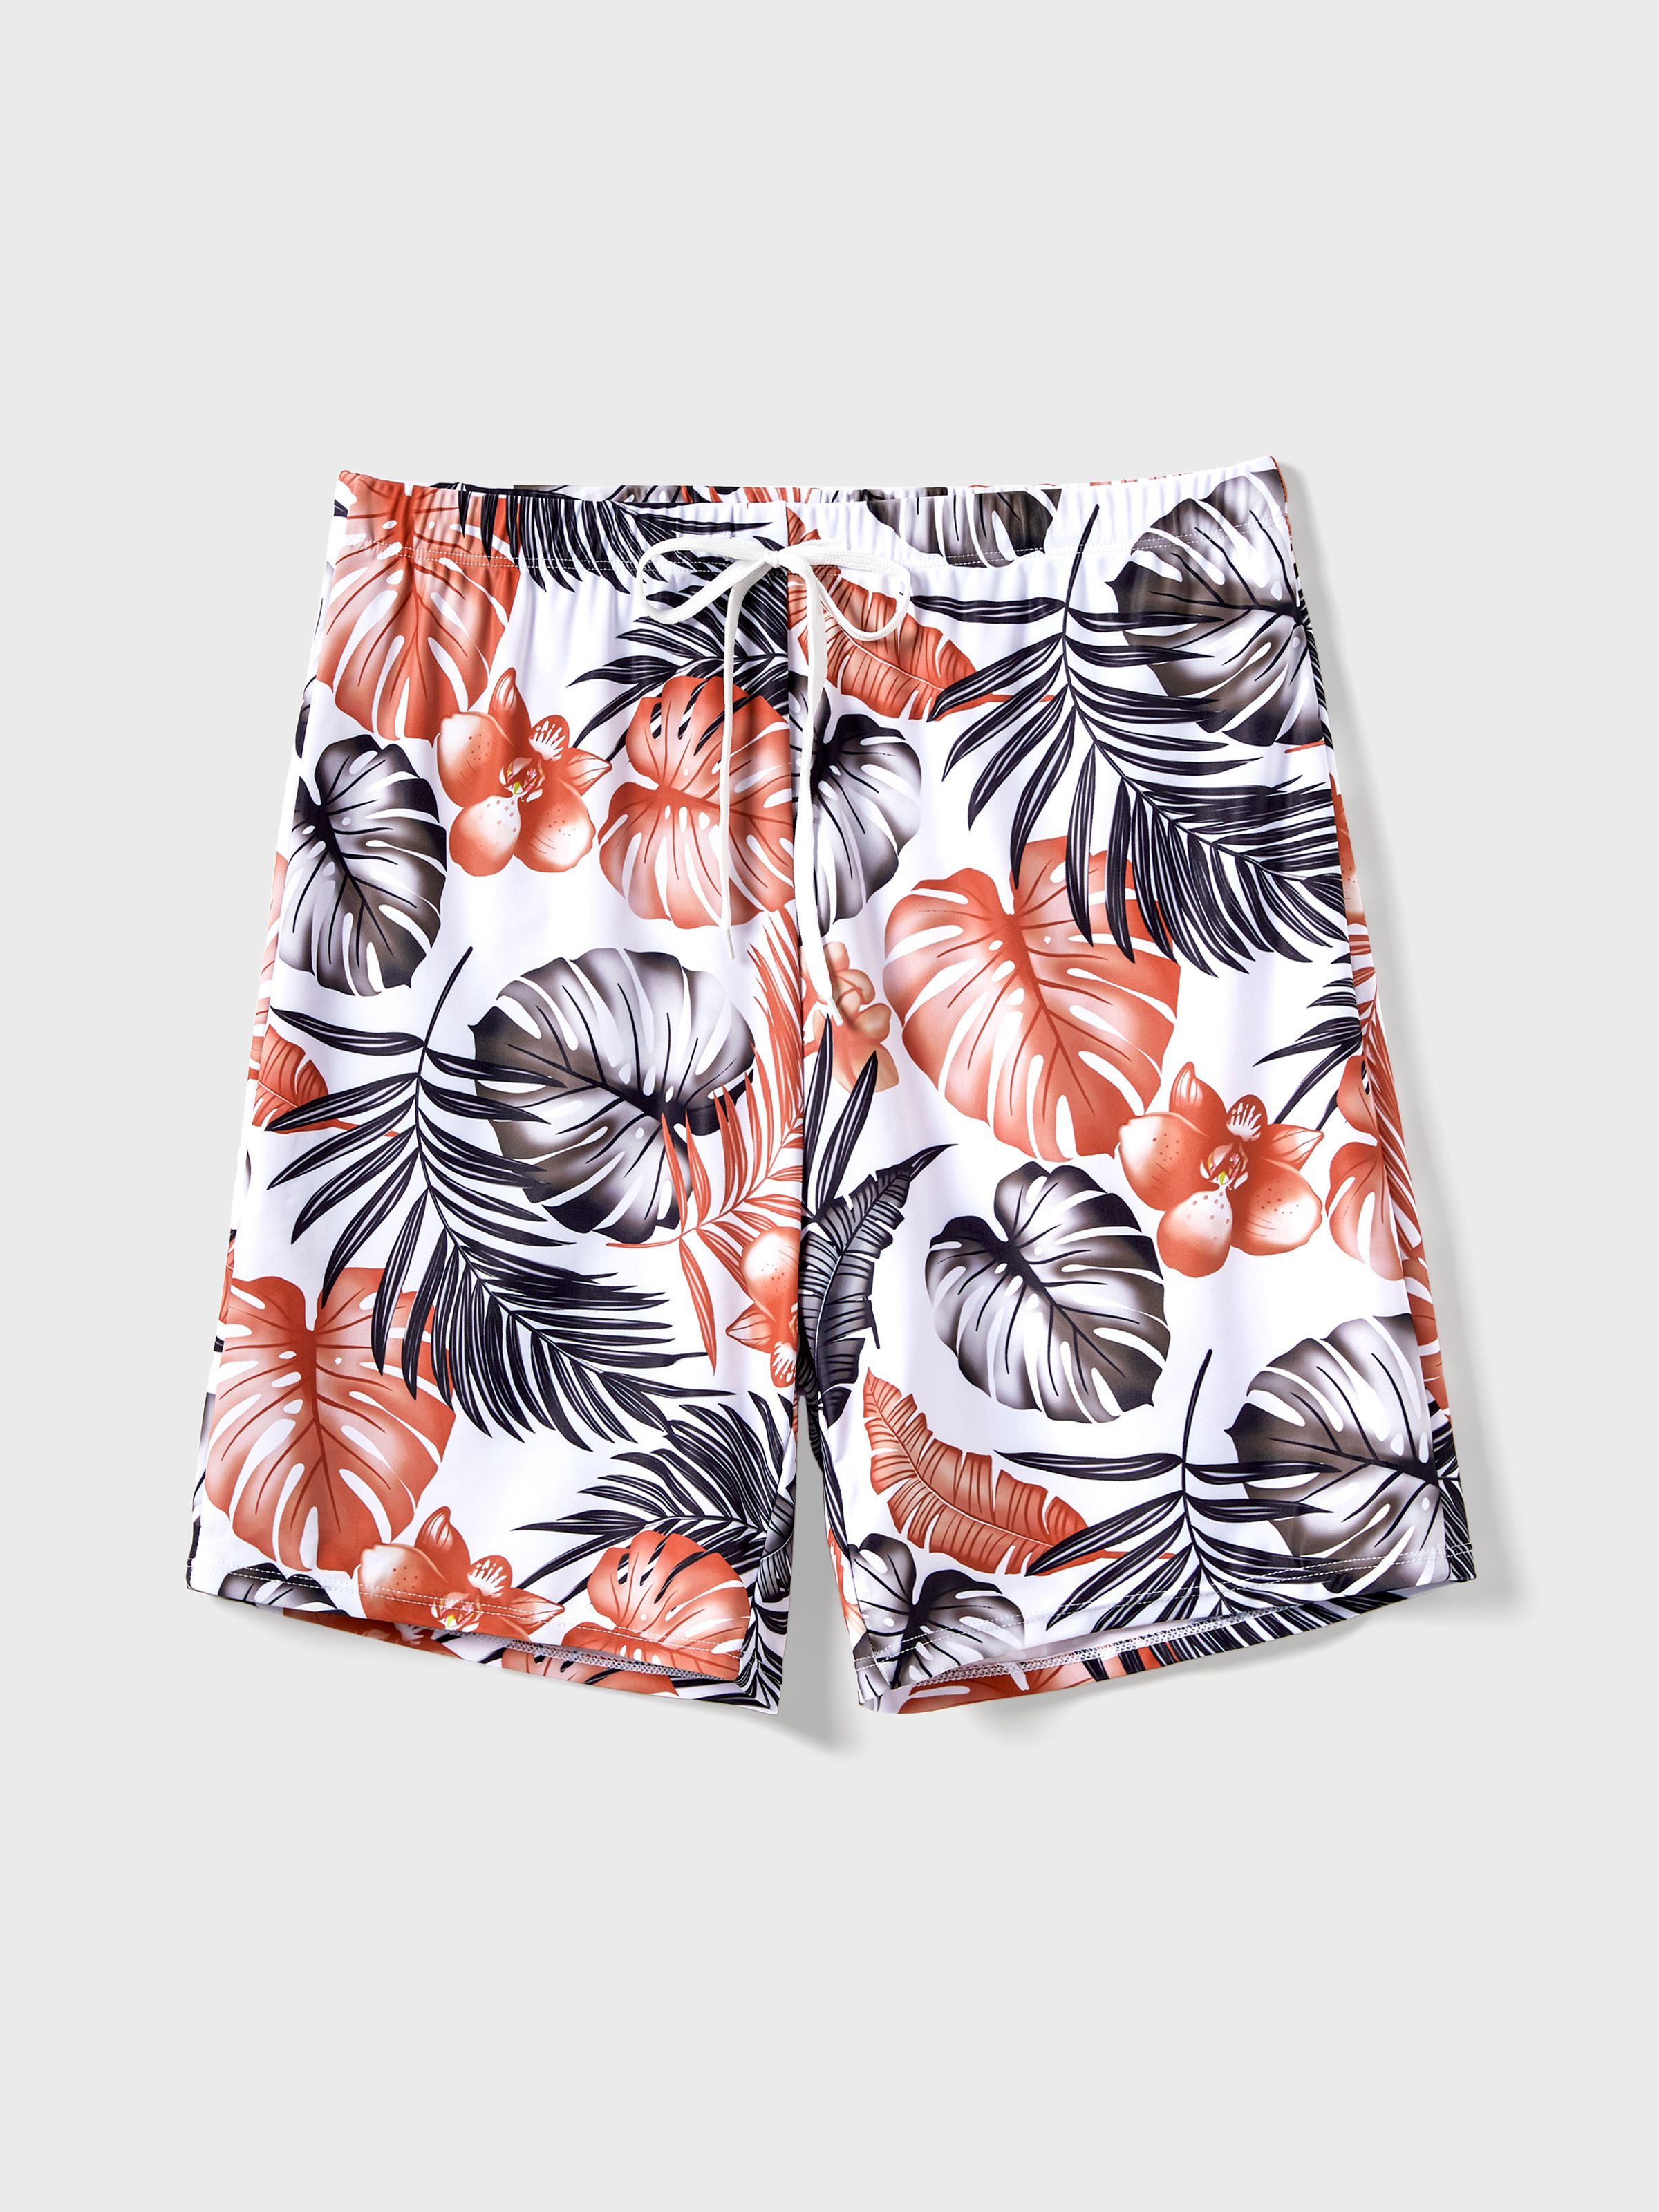 

Family Matching Floral Drawstring Swim Trunks or Color Block Wrap Side Swimsuit with Optional Swim Cover Up